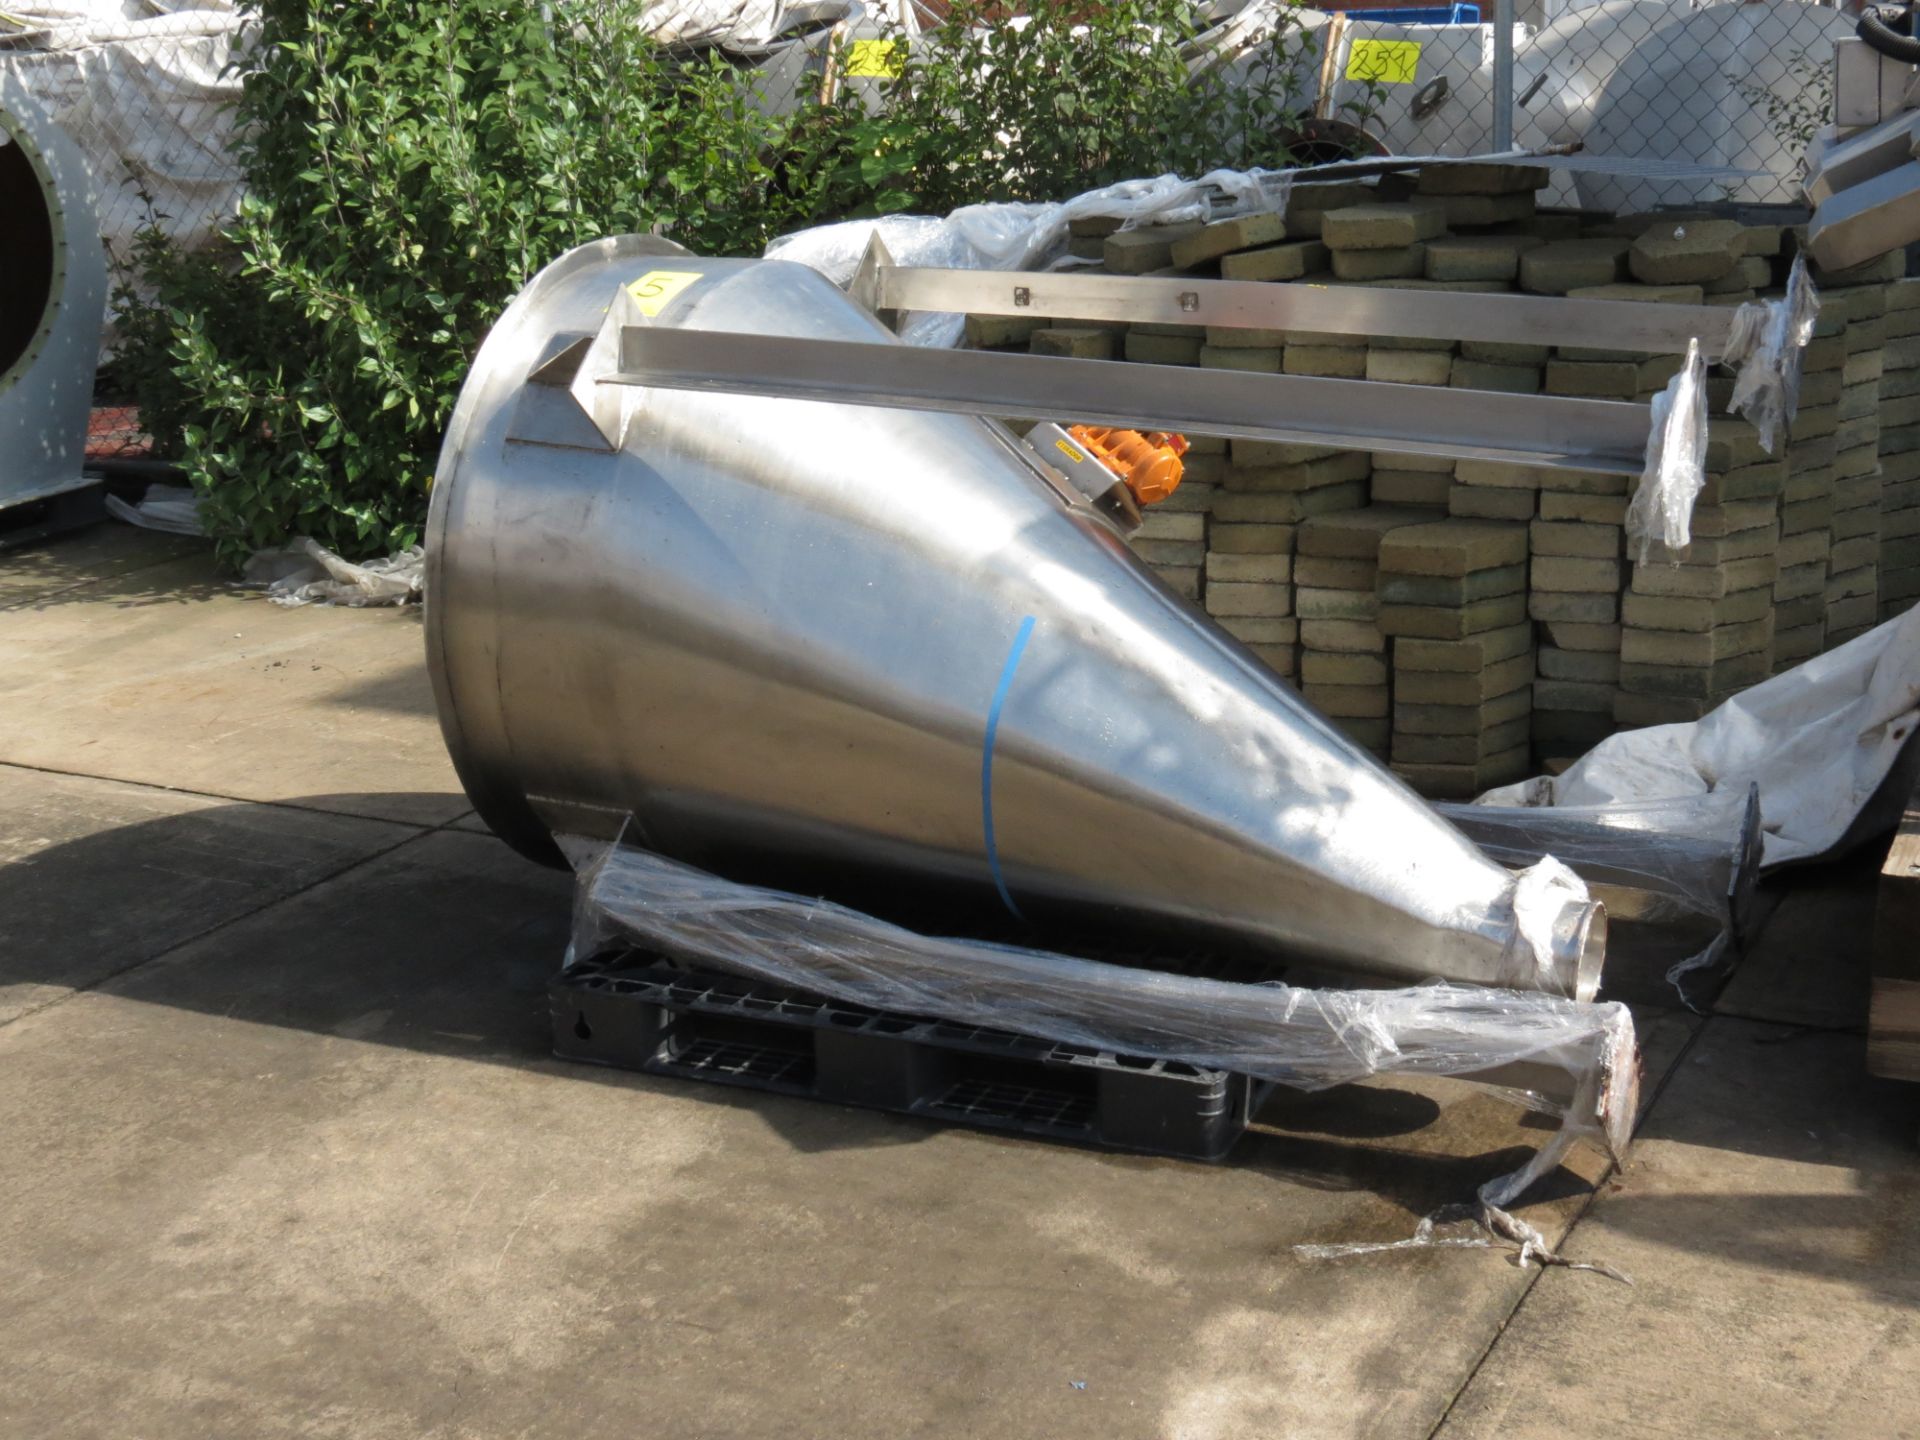 S/S Vibratory Hopper for Bulk Bag Filling of Powders, Includes Screens - Image 3 of 18